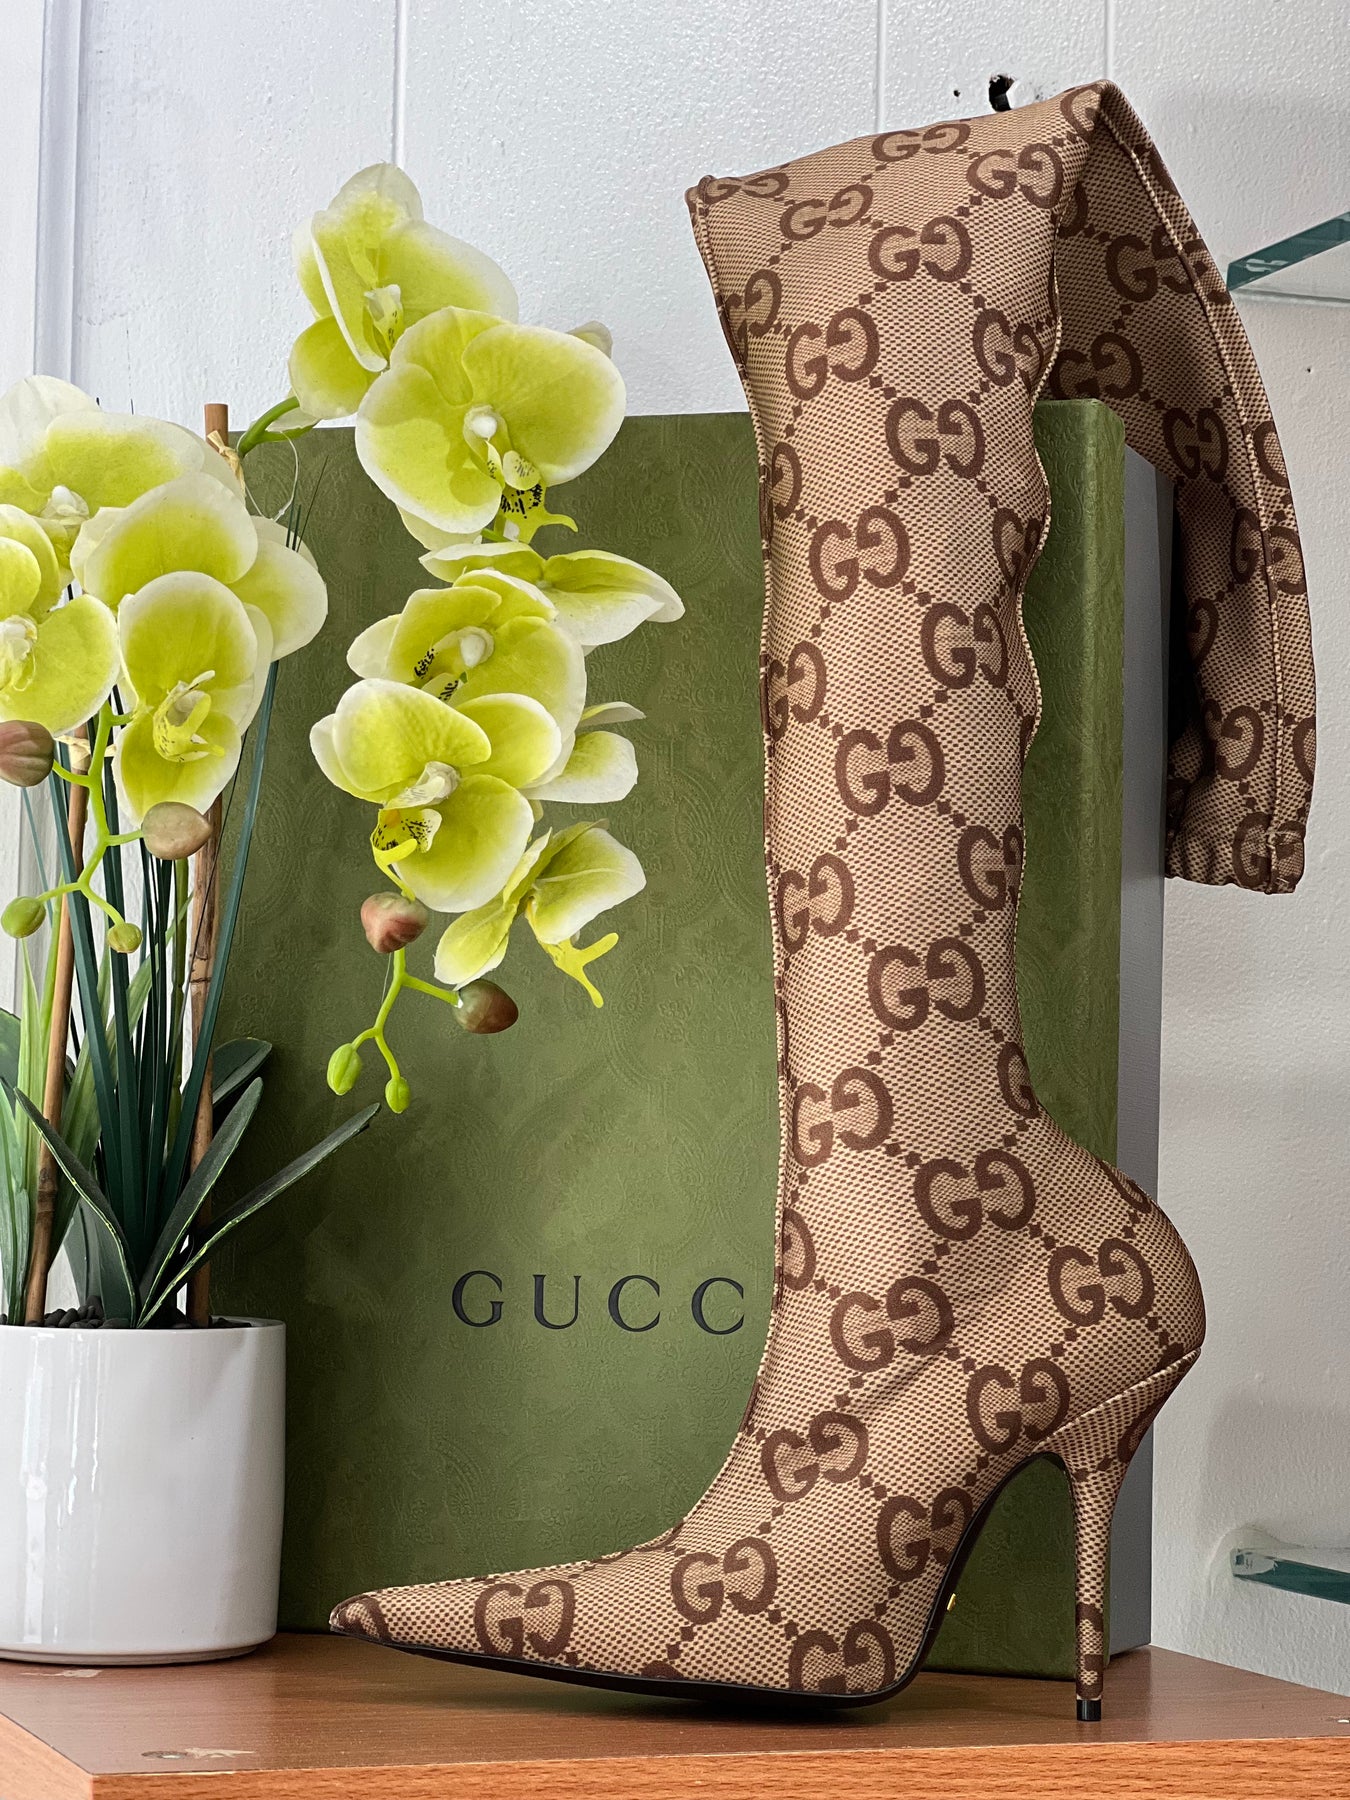 GUCCI GG THE HACKER PROJECT KNIFE KNEE HIGH BOOTS